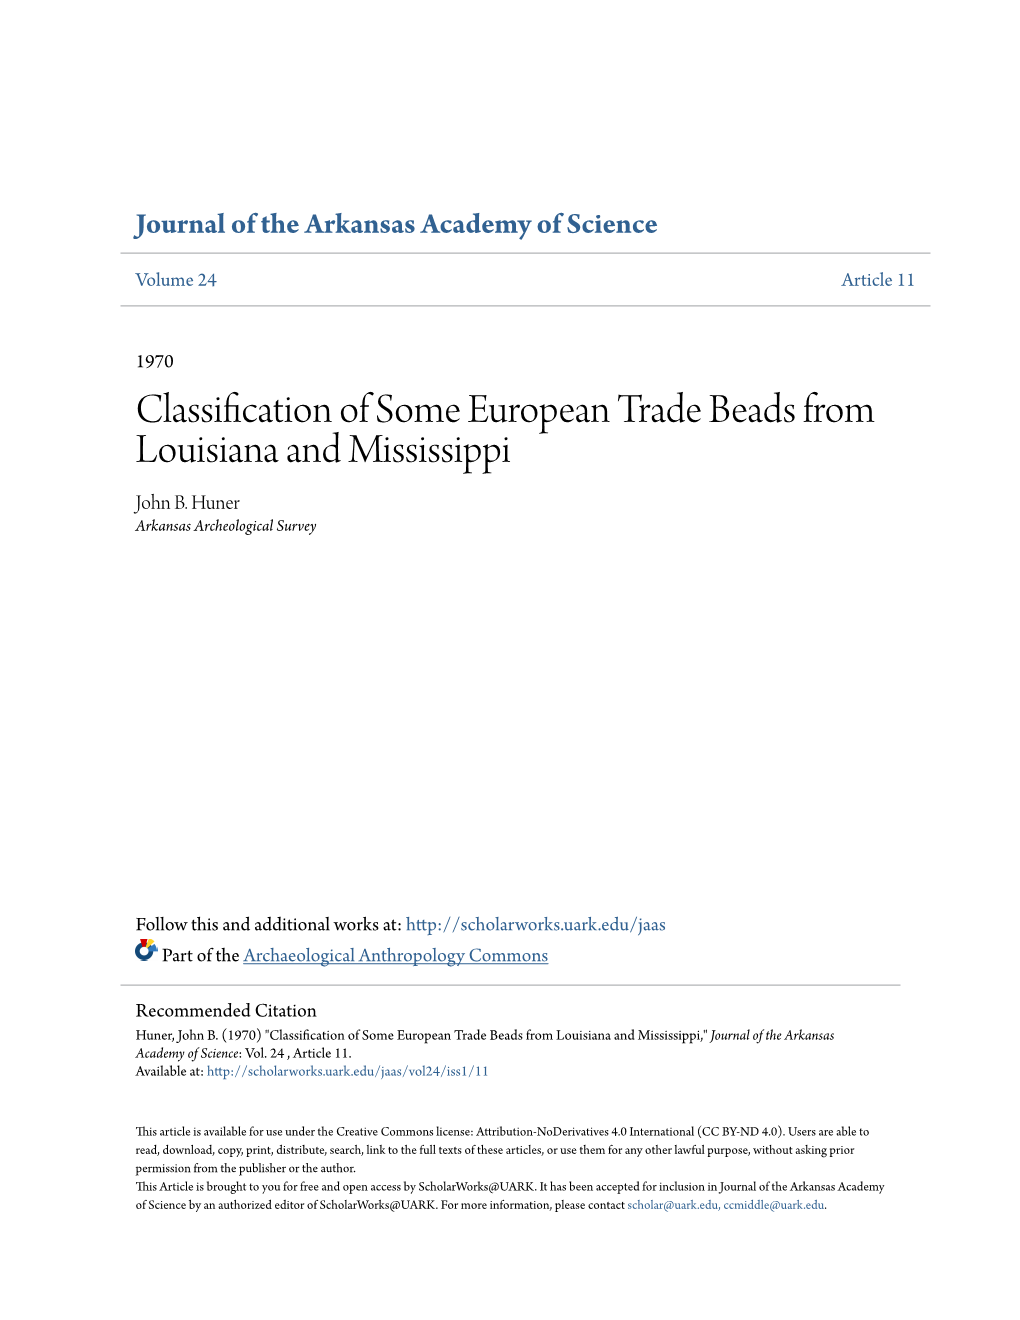 Classification of Some European Trade Beads from Louisiana and Mississippi John B